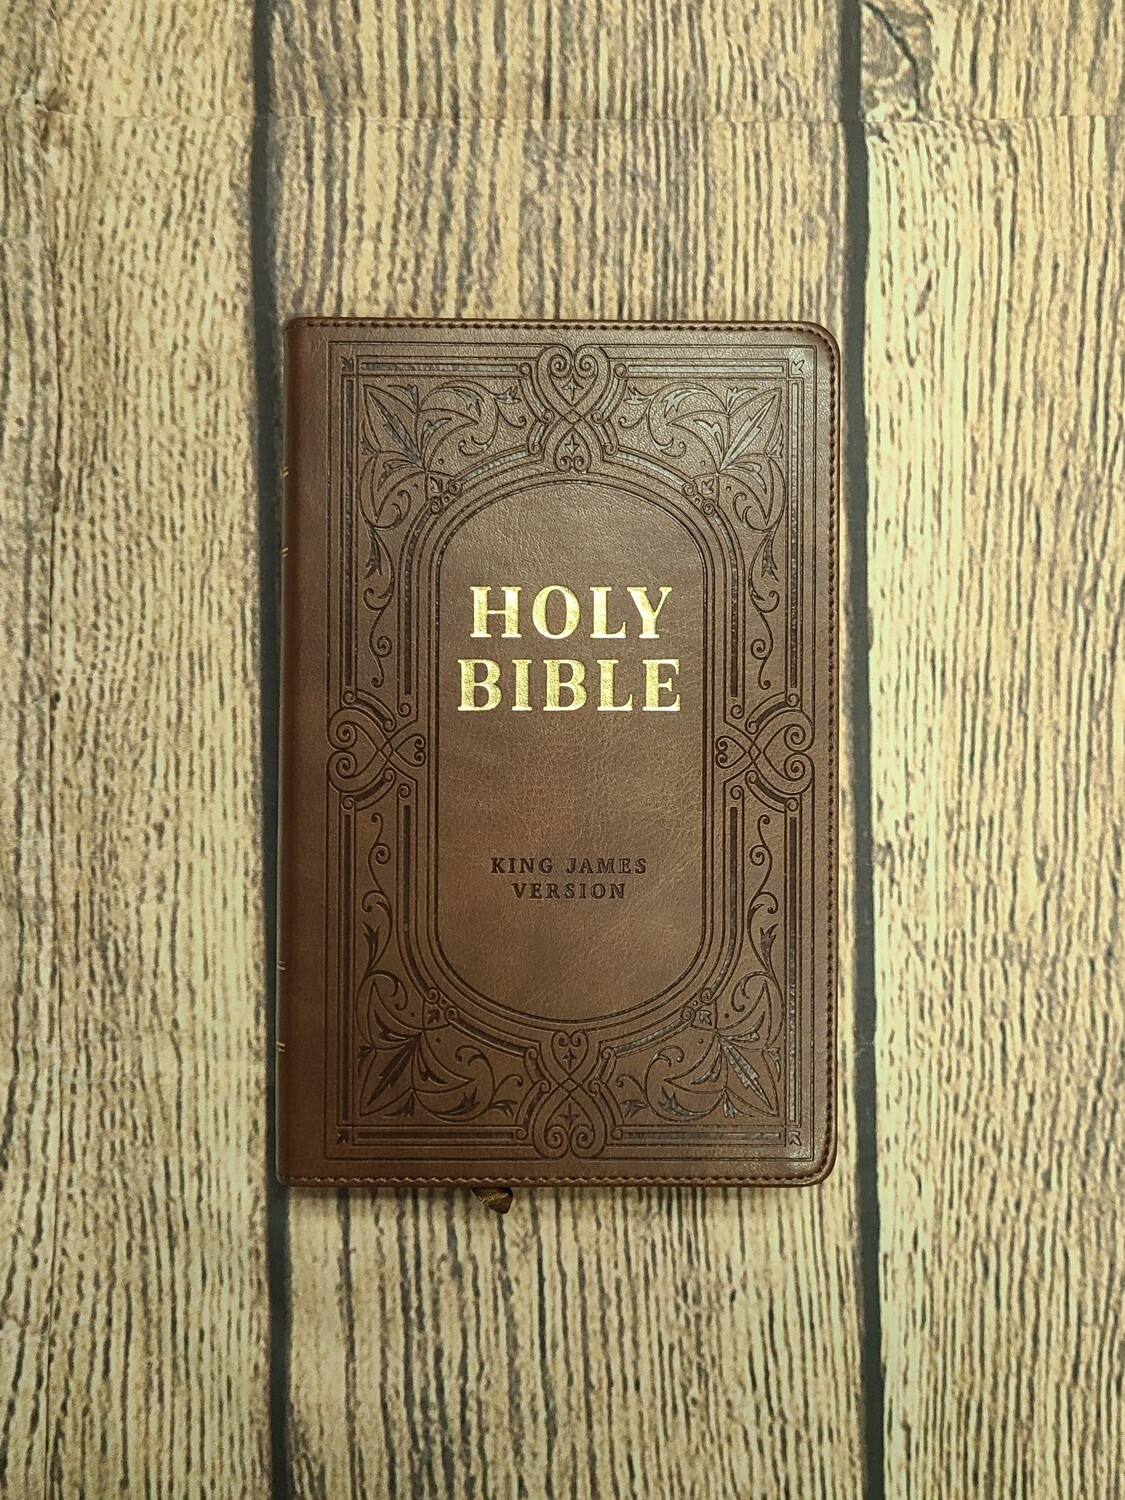 KJV Giant Print Bible Thumb Indexed - Brown Leather